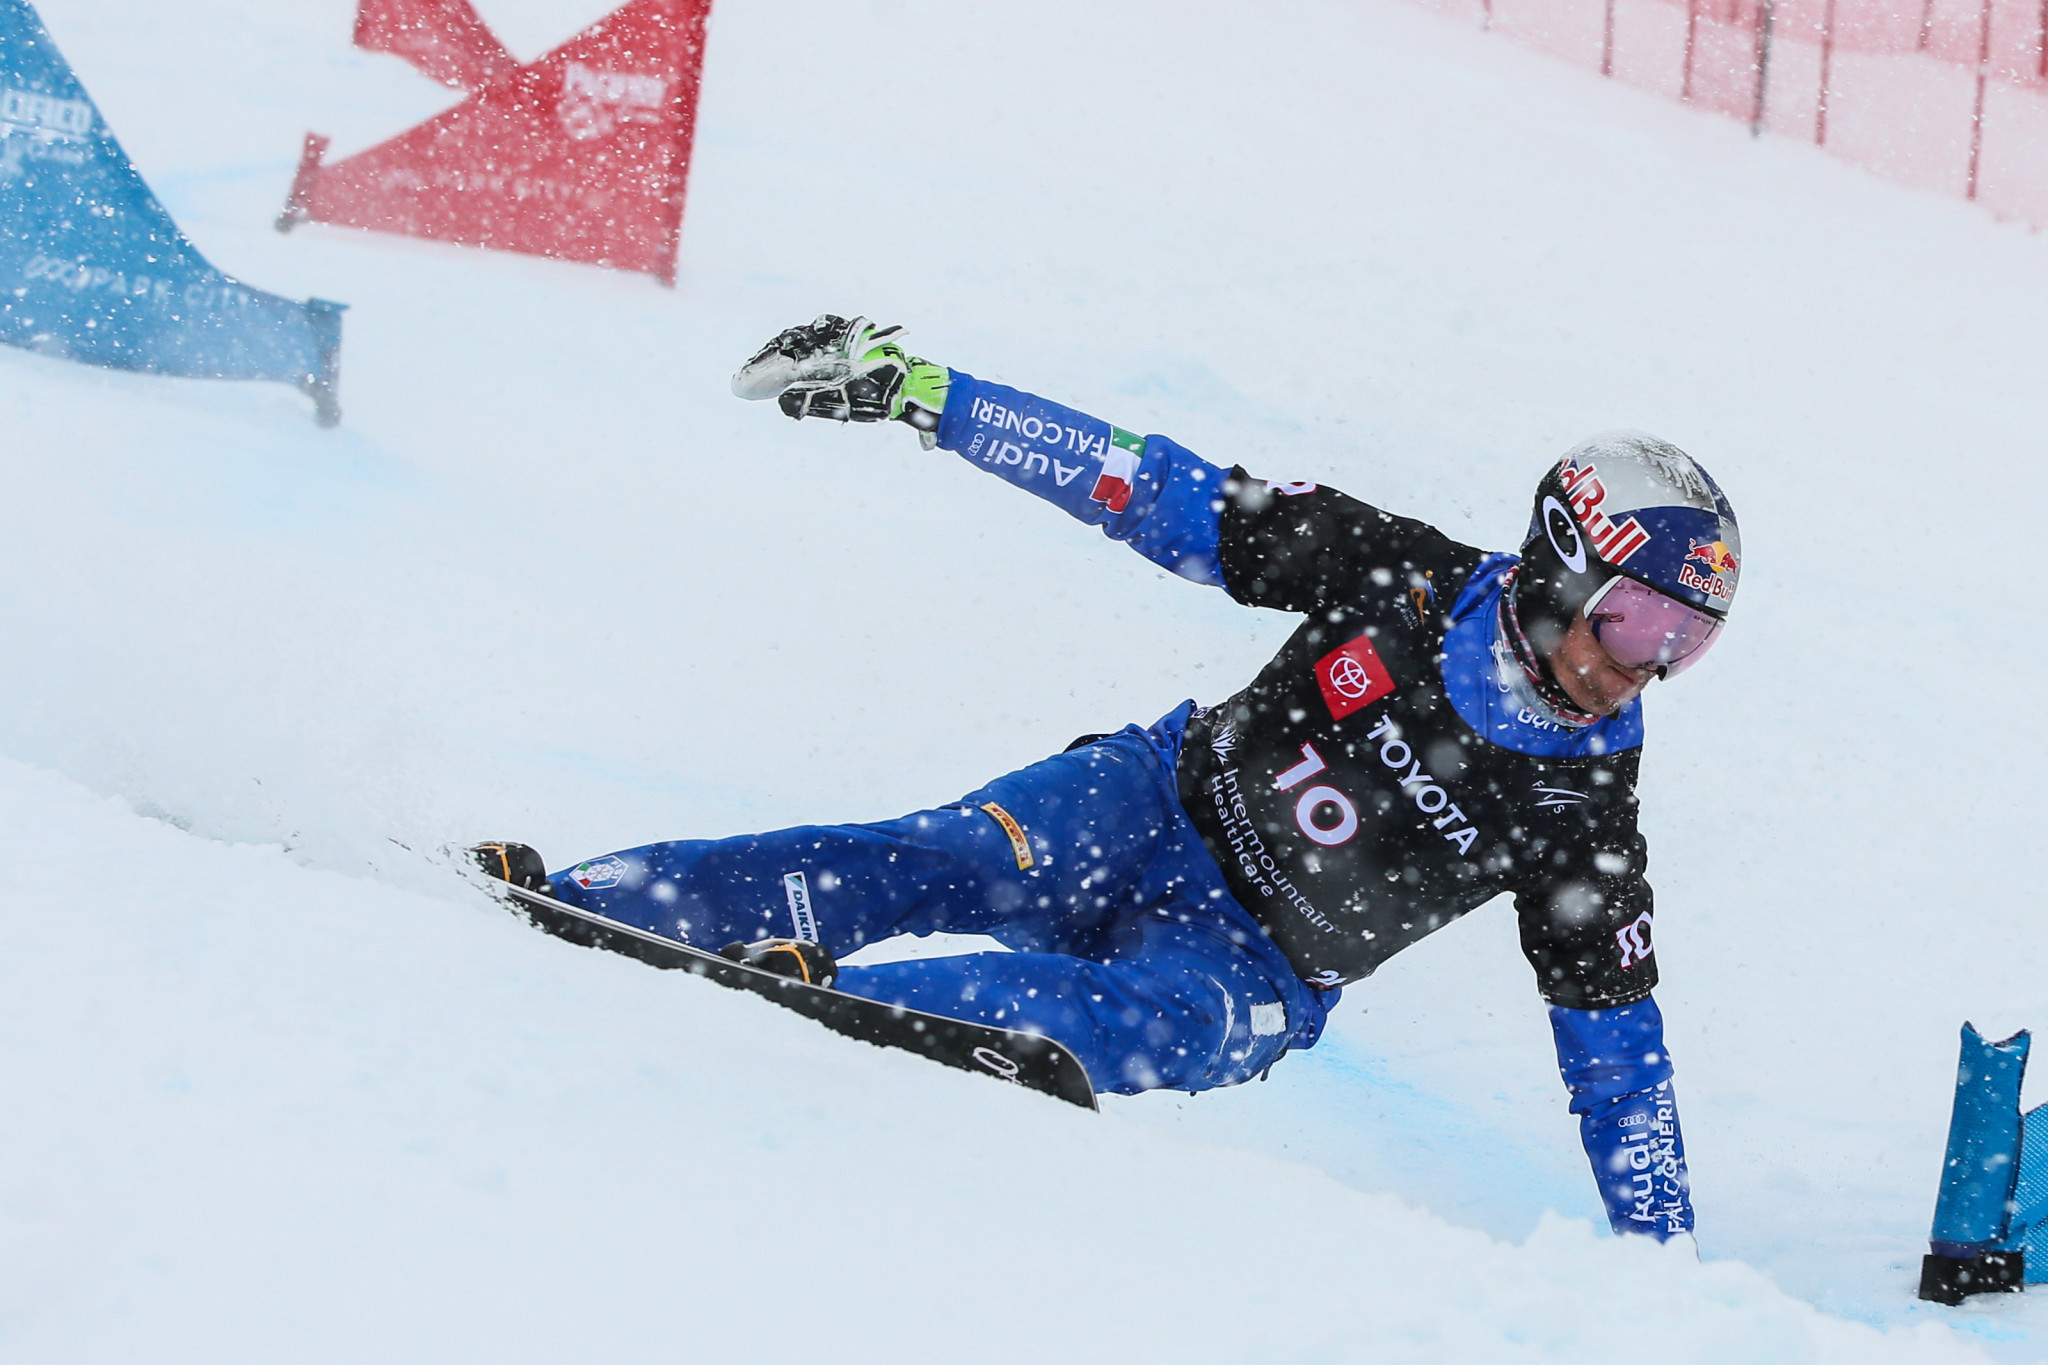 Parallel giant slalom to be held at FIS Alpine Snowboard World Cup in Rogla